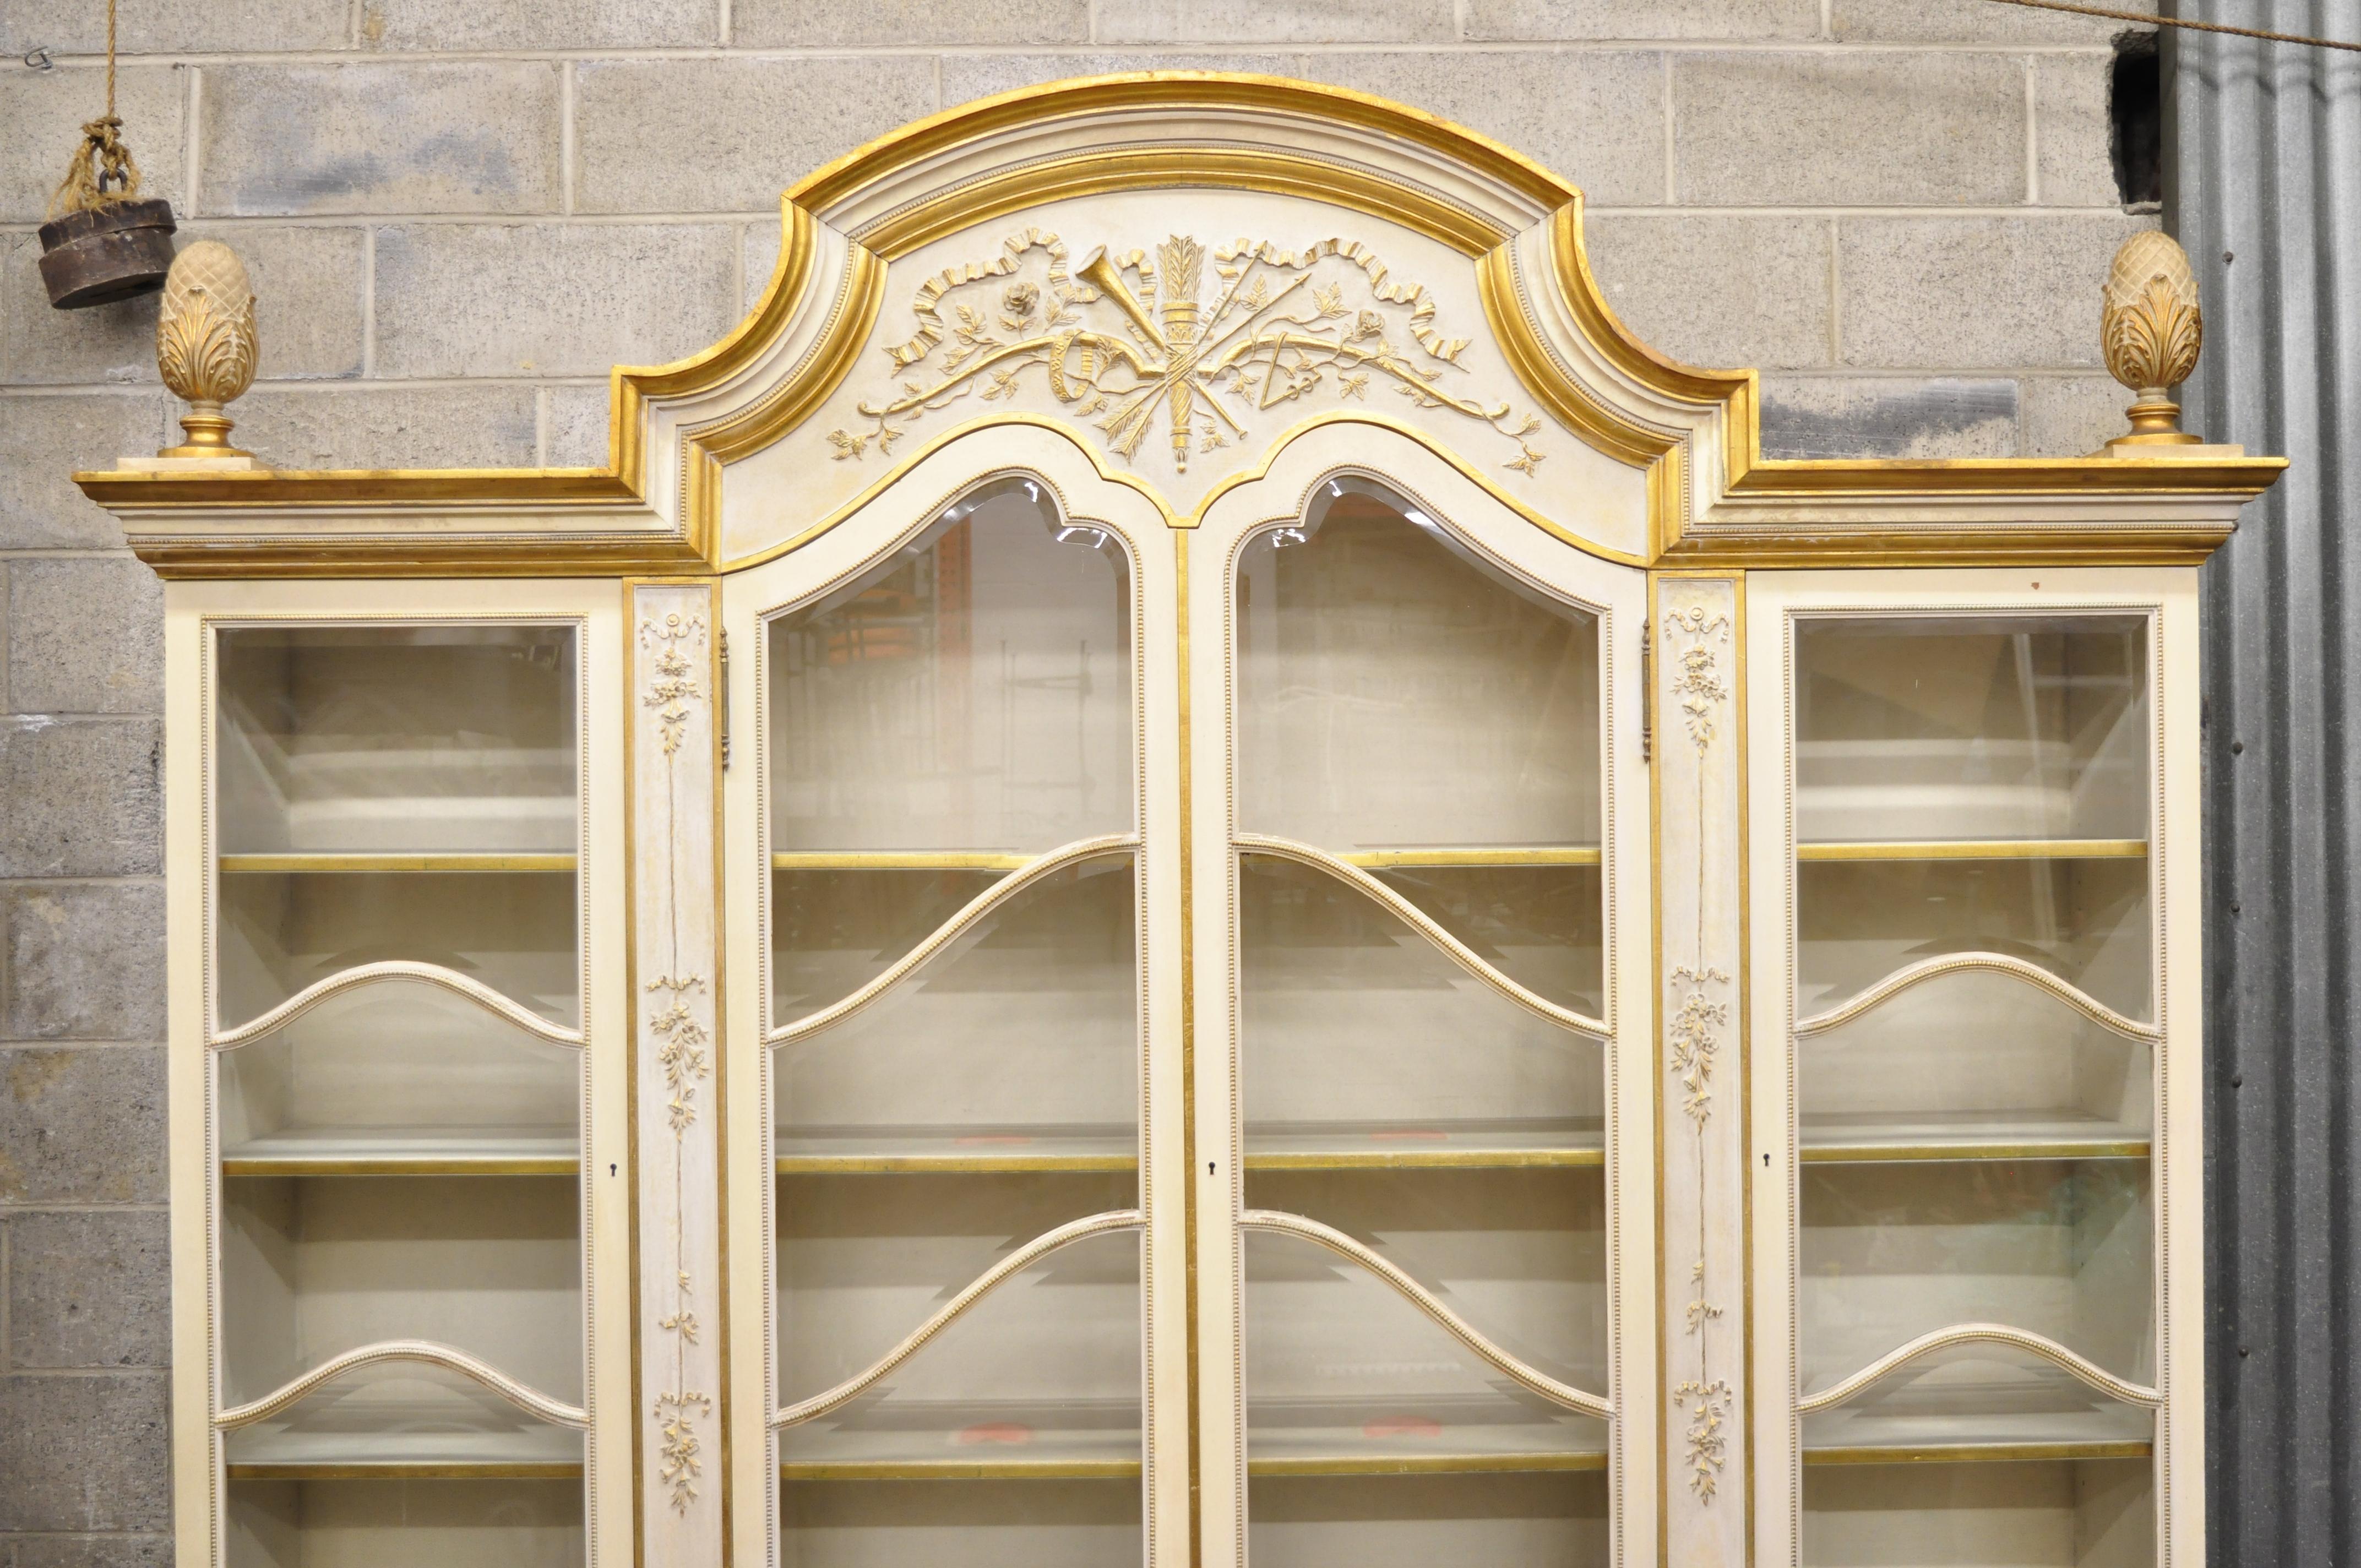 Large Italian Regency cream and gold gilt breakfront China display cabinet



Details: 2 piece construction, cream and gold gilt distressed finish, beveled glass doors, 12 adjustable wooden shelves, working lock and key, carved musical